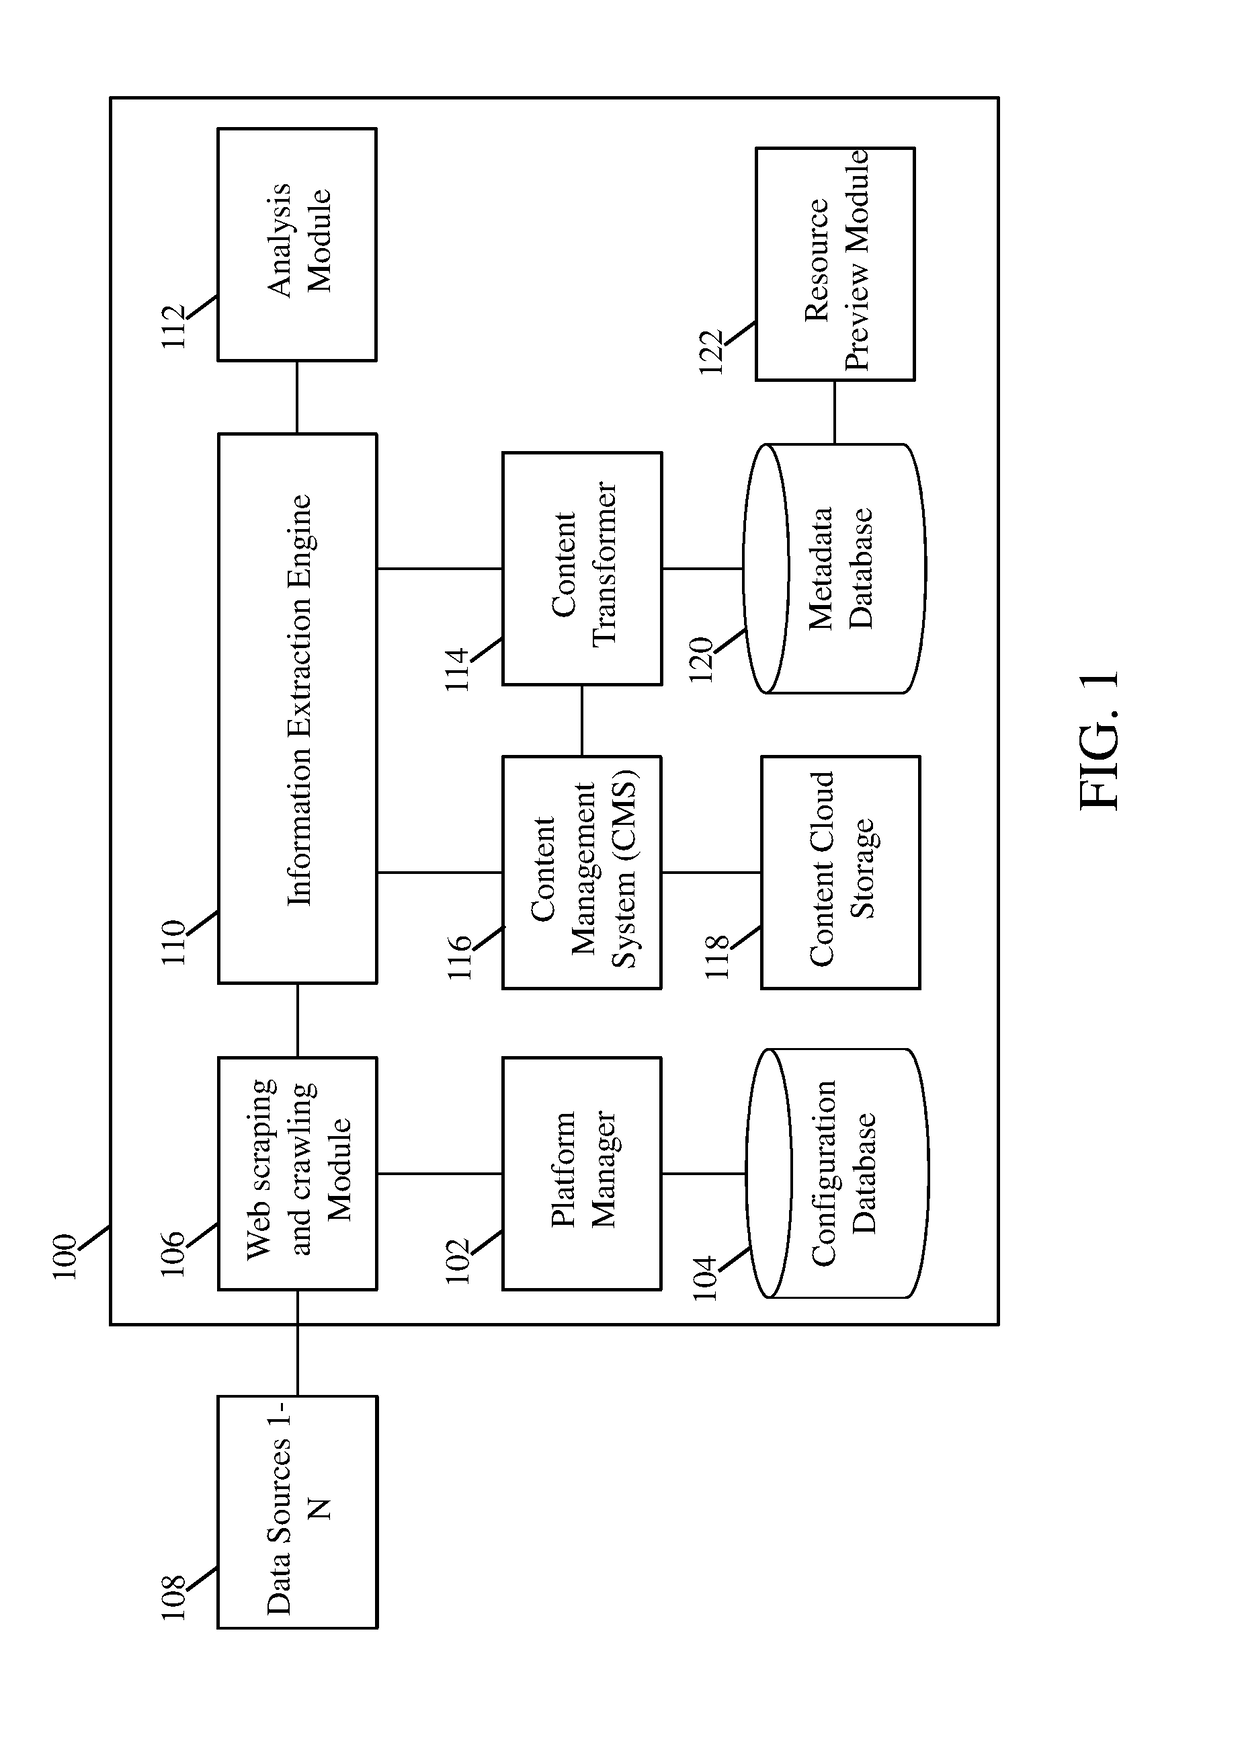 System and Method for Automatically Extracting and Analyzing Data